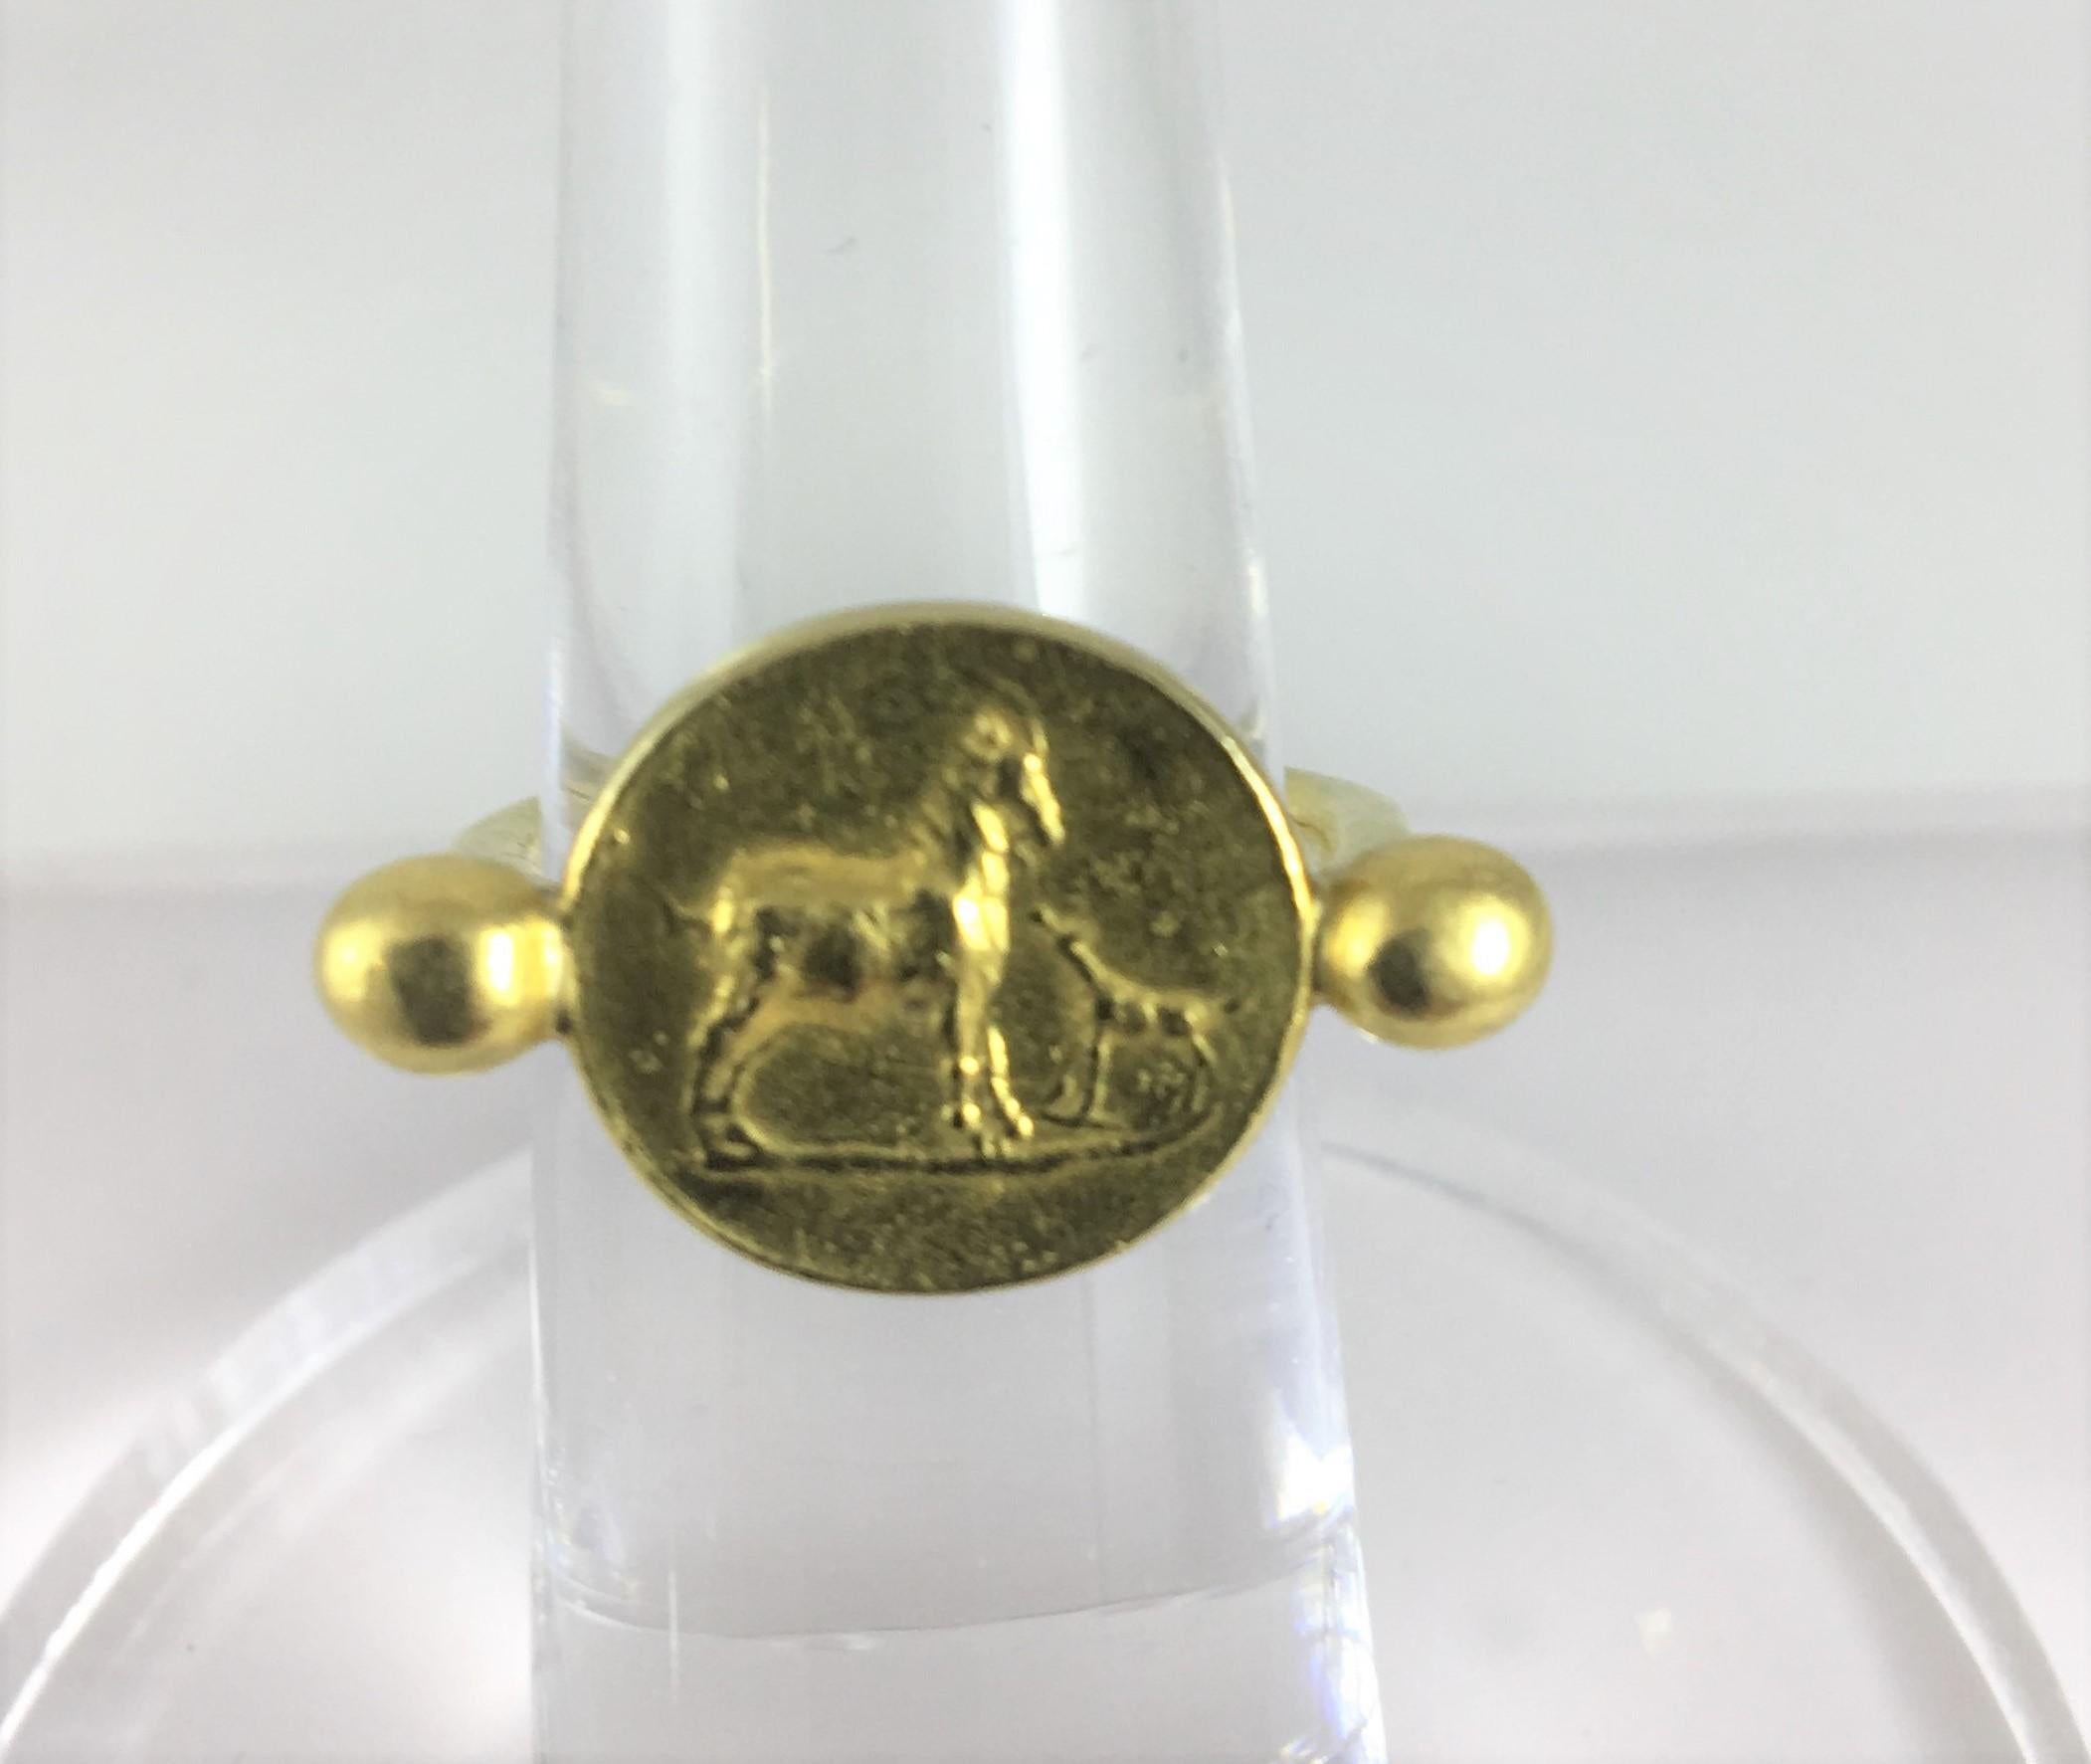 Helen Woodhull, New York City
22K yellow gold ring 
Raised Roman-style Horse and Foal Motif 
Circa 1970's
Size 6